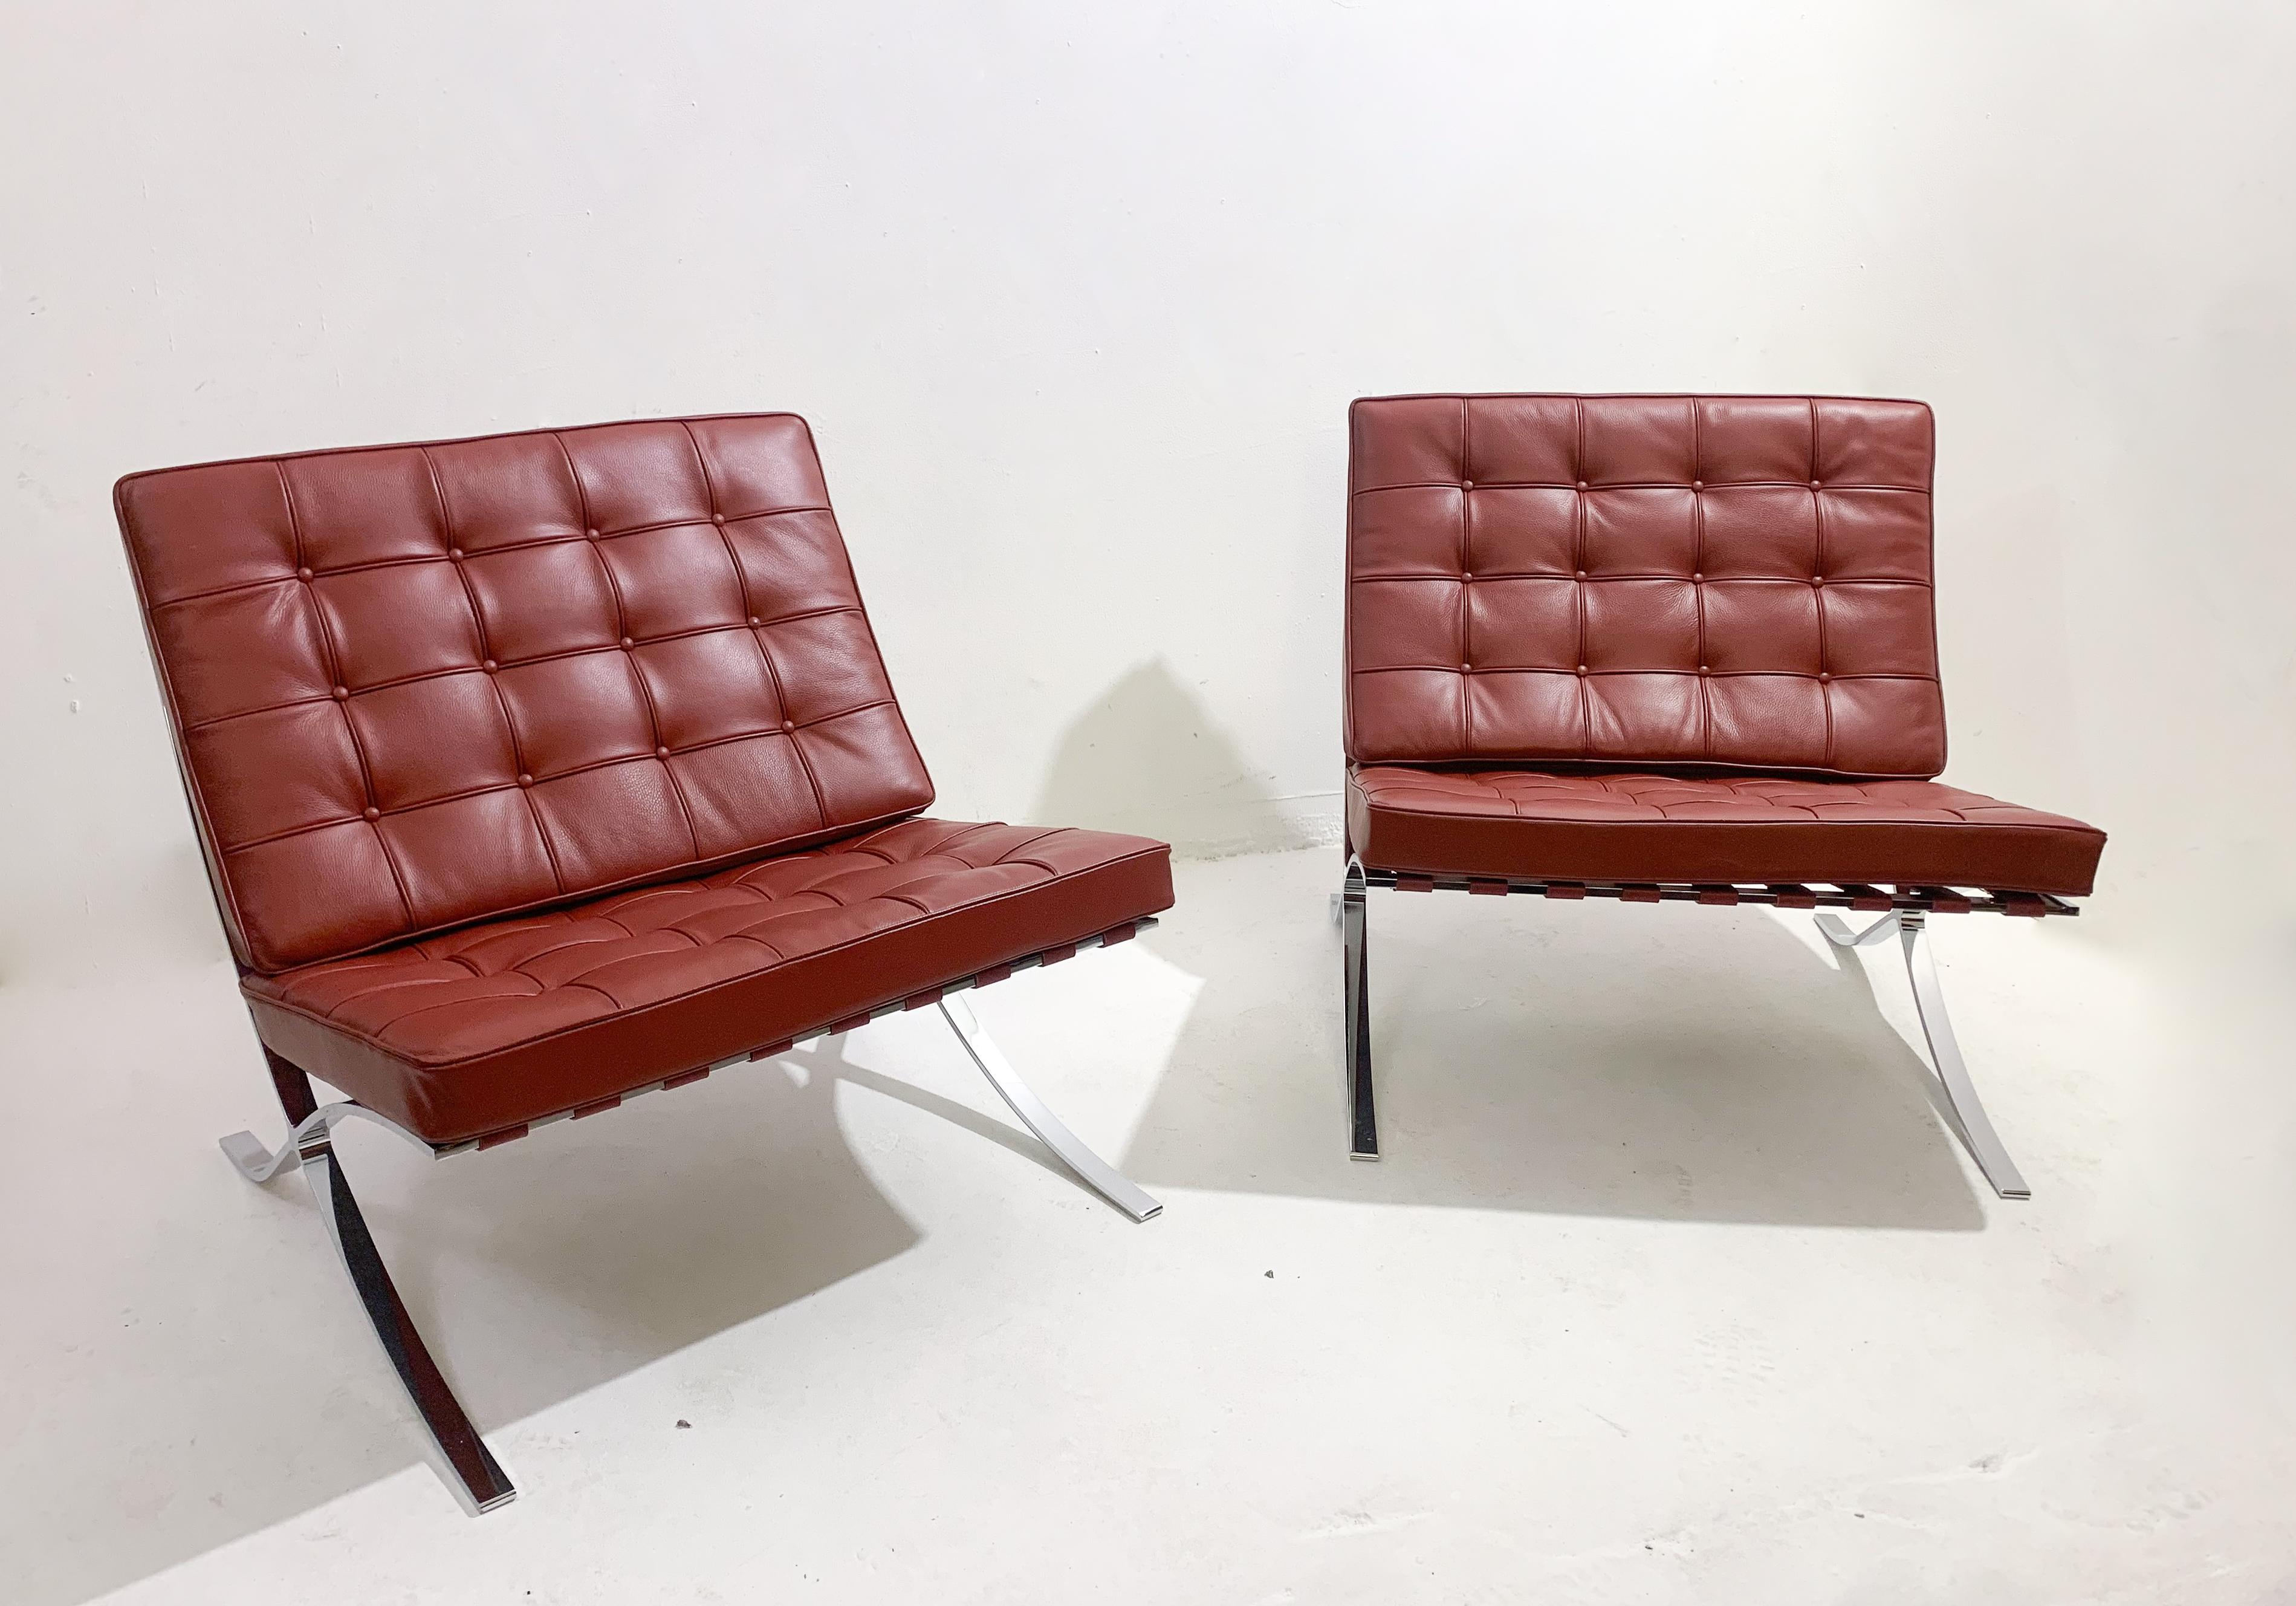 Pair of Burgundy Leather Barcelona Chairs by Mies Van Der Rohe for Knoll, 1990s For Sale 7